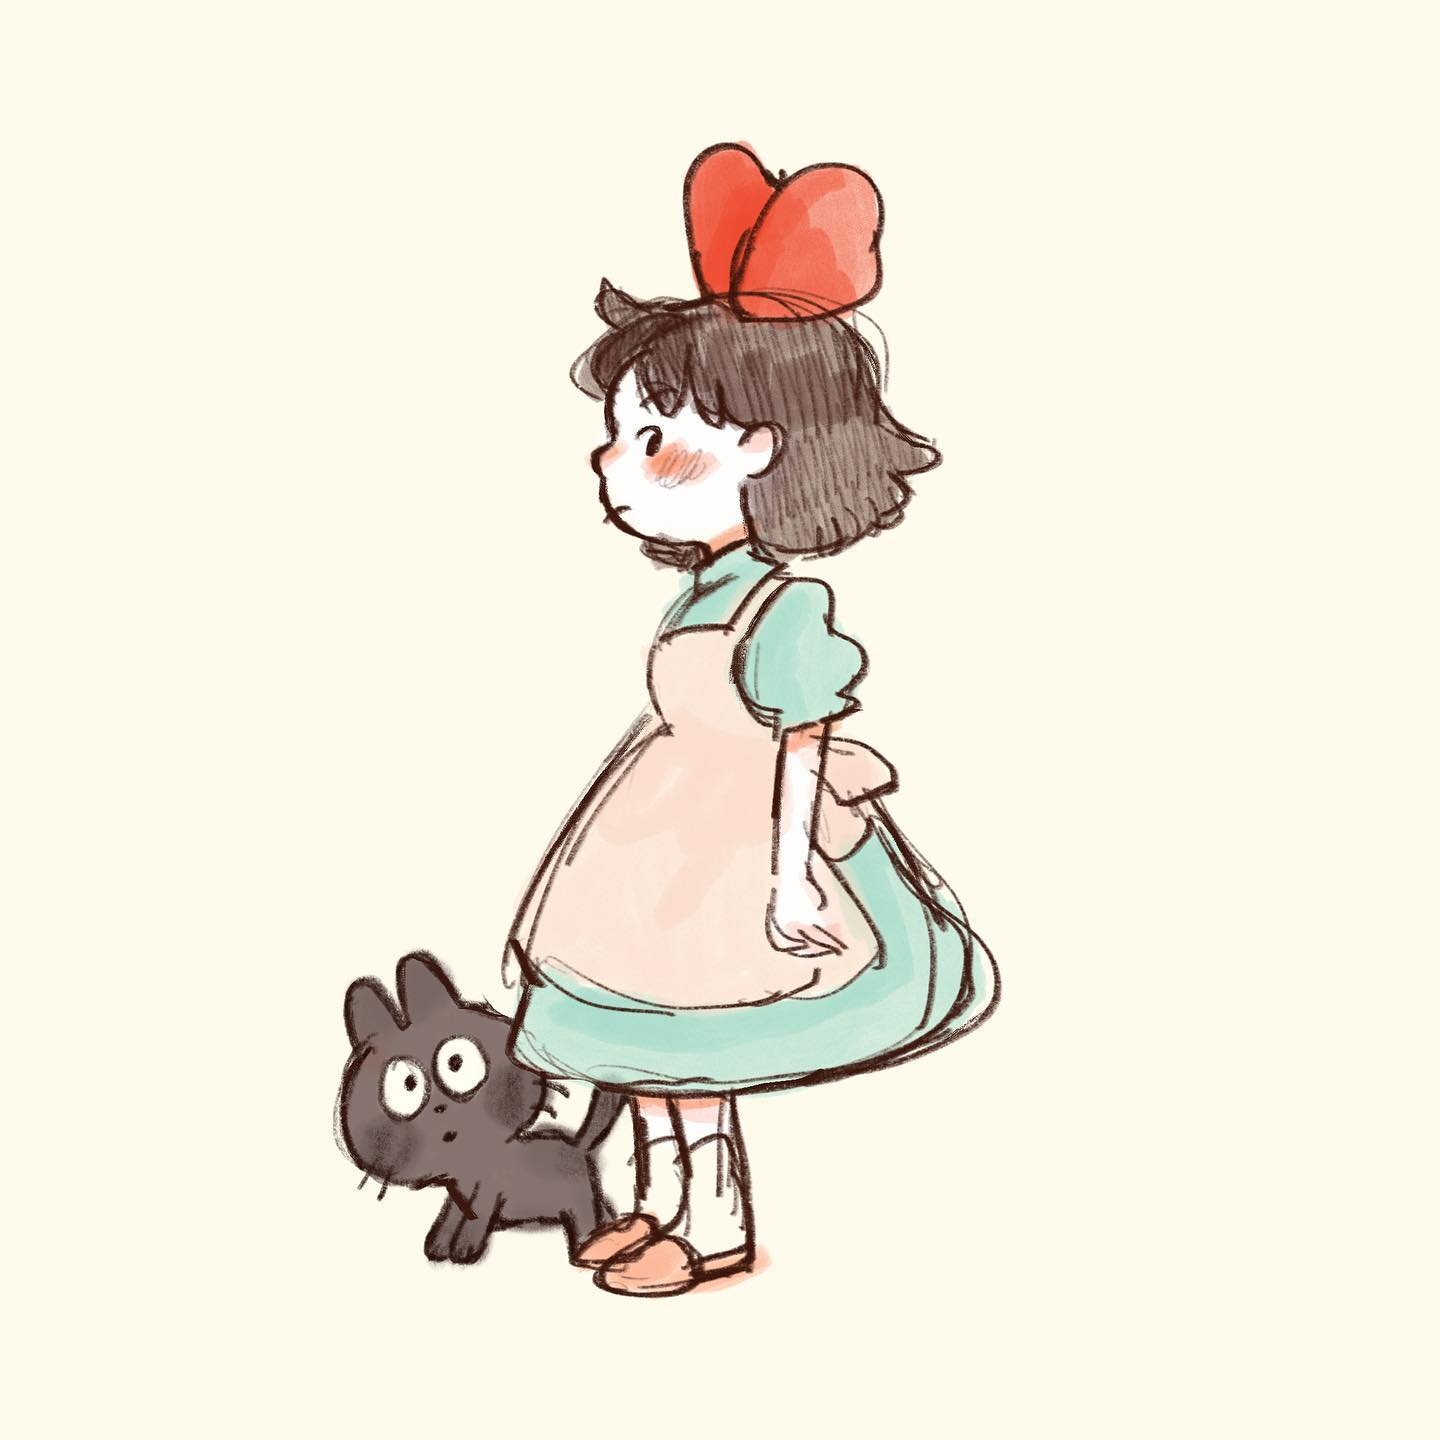 kiki is a character i could draw over and over without being tired + some other sketchbook things
&mdash;
#kikisdeliveryservice #drawings #sketchbook